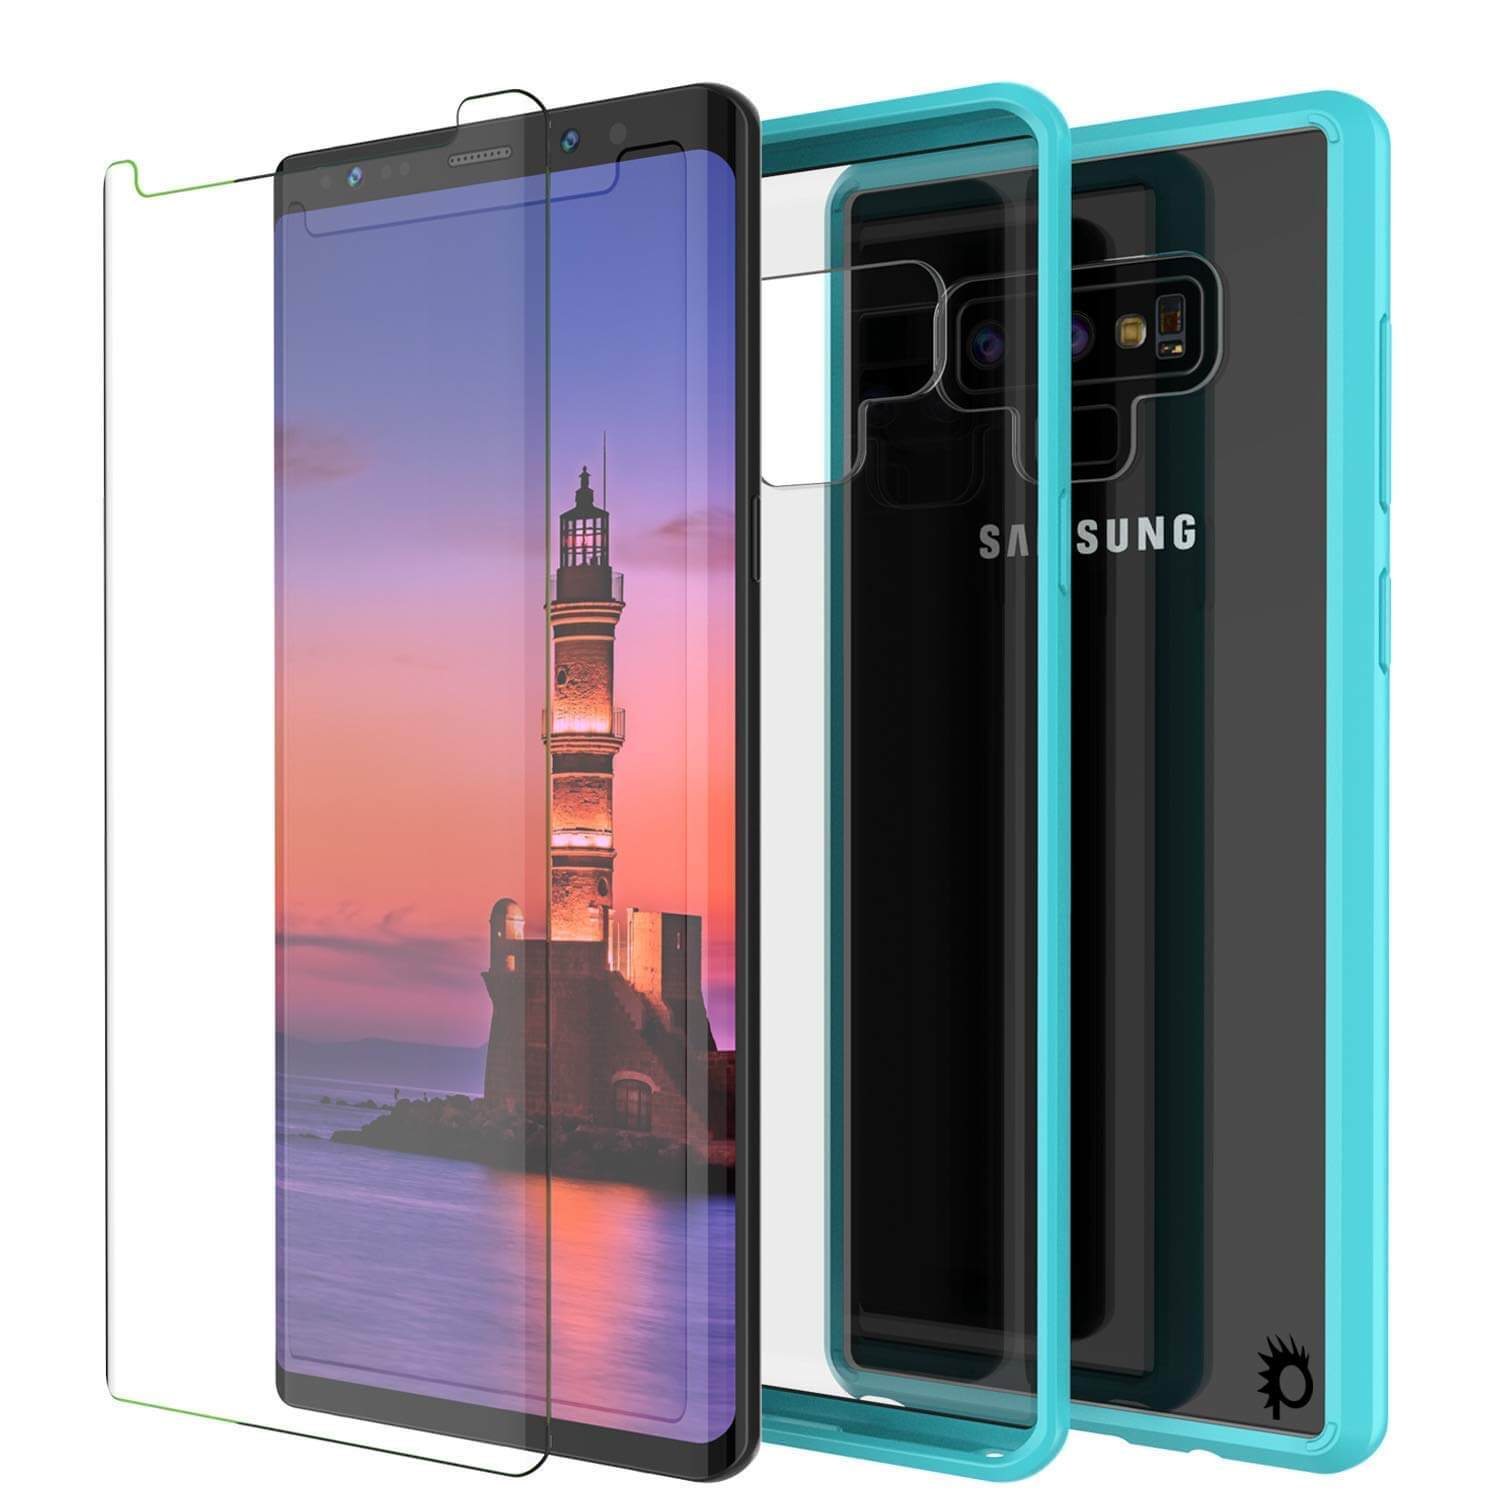 Galaxy Note 9 Case, PUNKcase [LUCID 2.0 Series] [Slim Fit] Armor Cover W/Integrated Anti-Shock System [Teal]